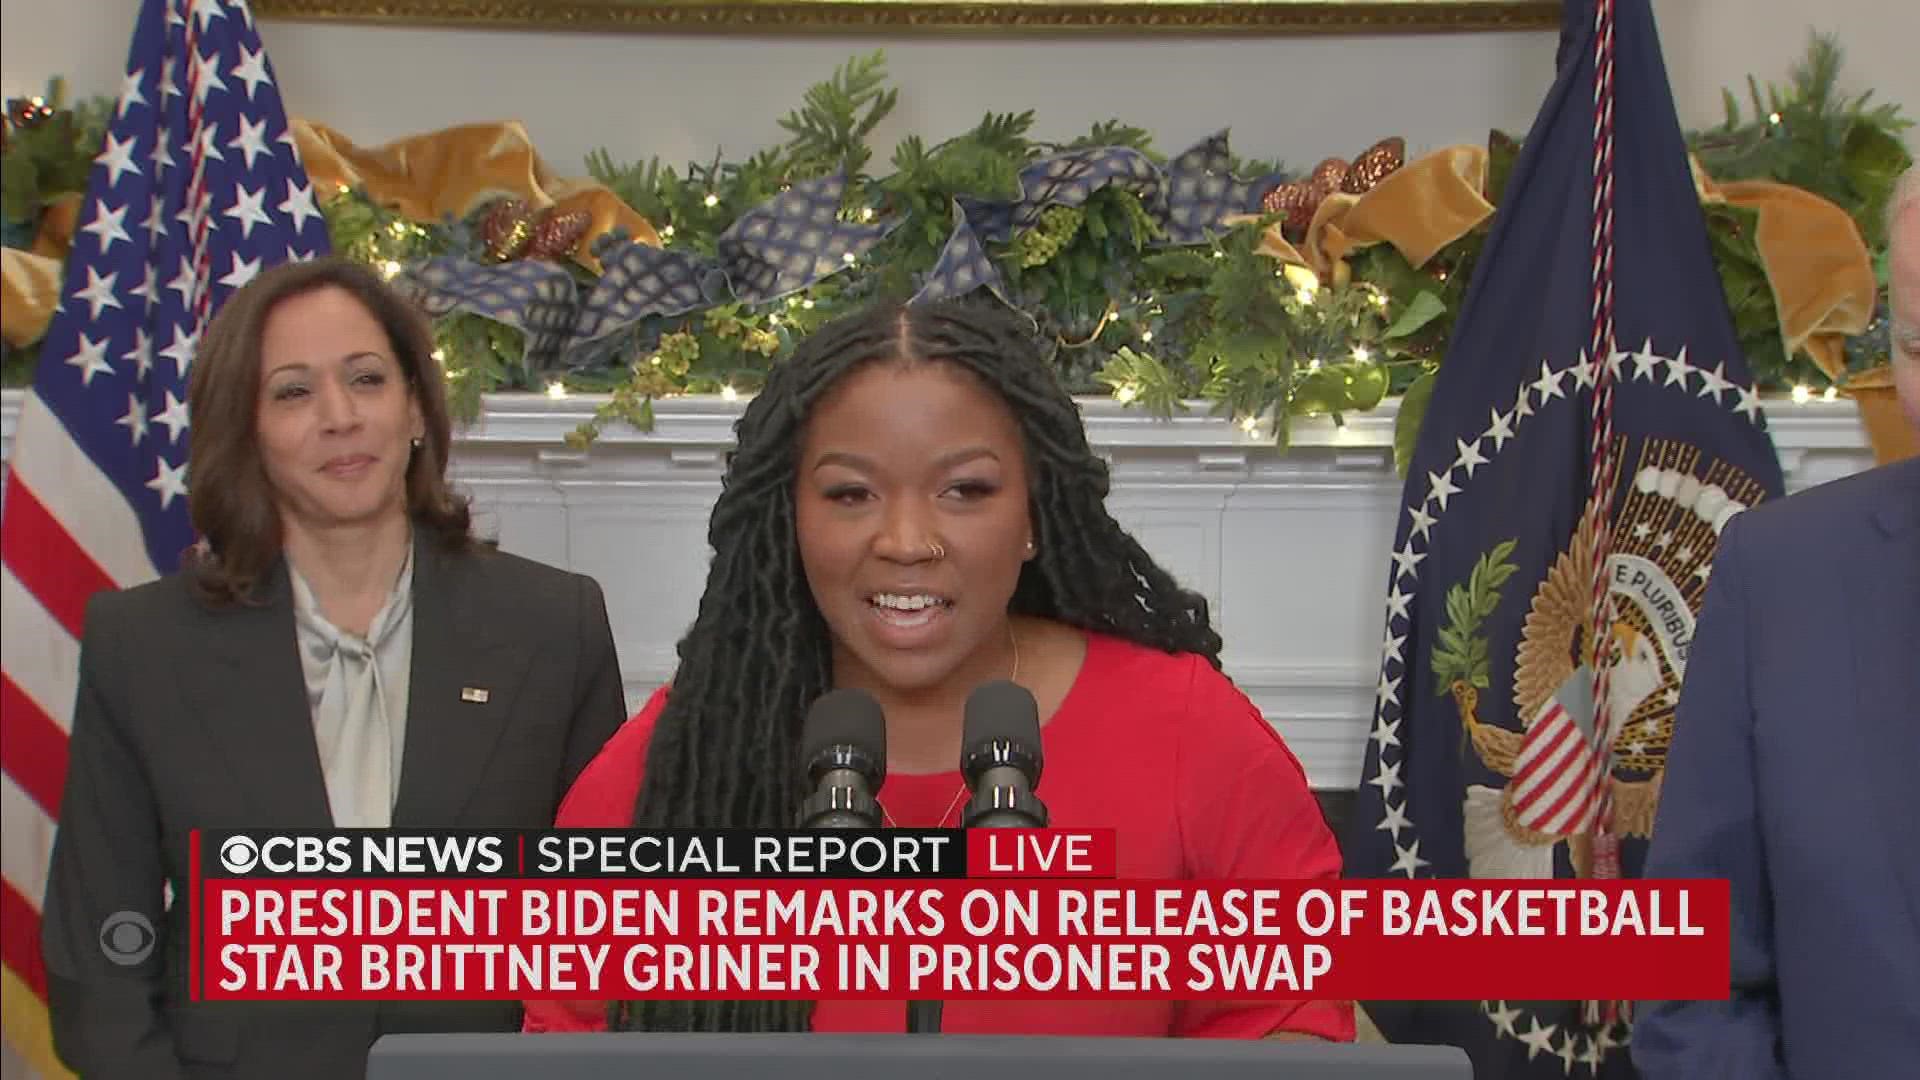 Brittney Griner's wife, Cherelle, spoke after the news that the WNBA star was freed in a prisoner swap.